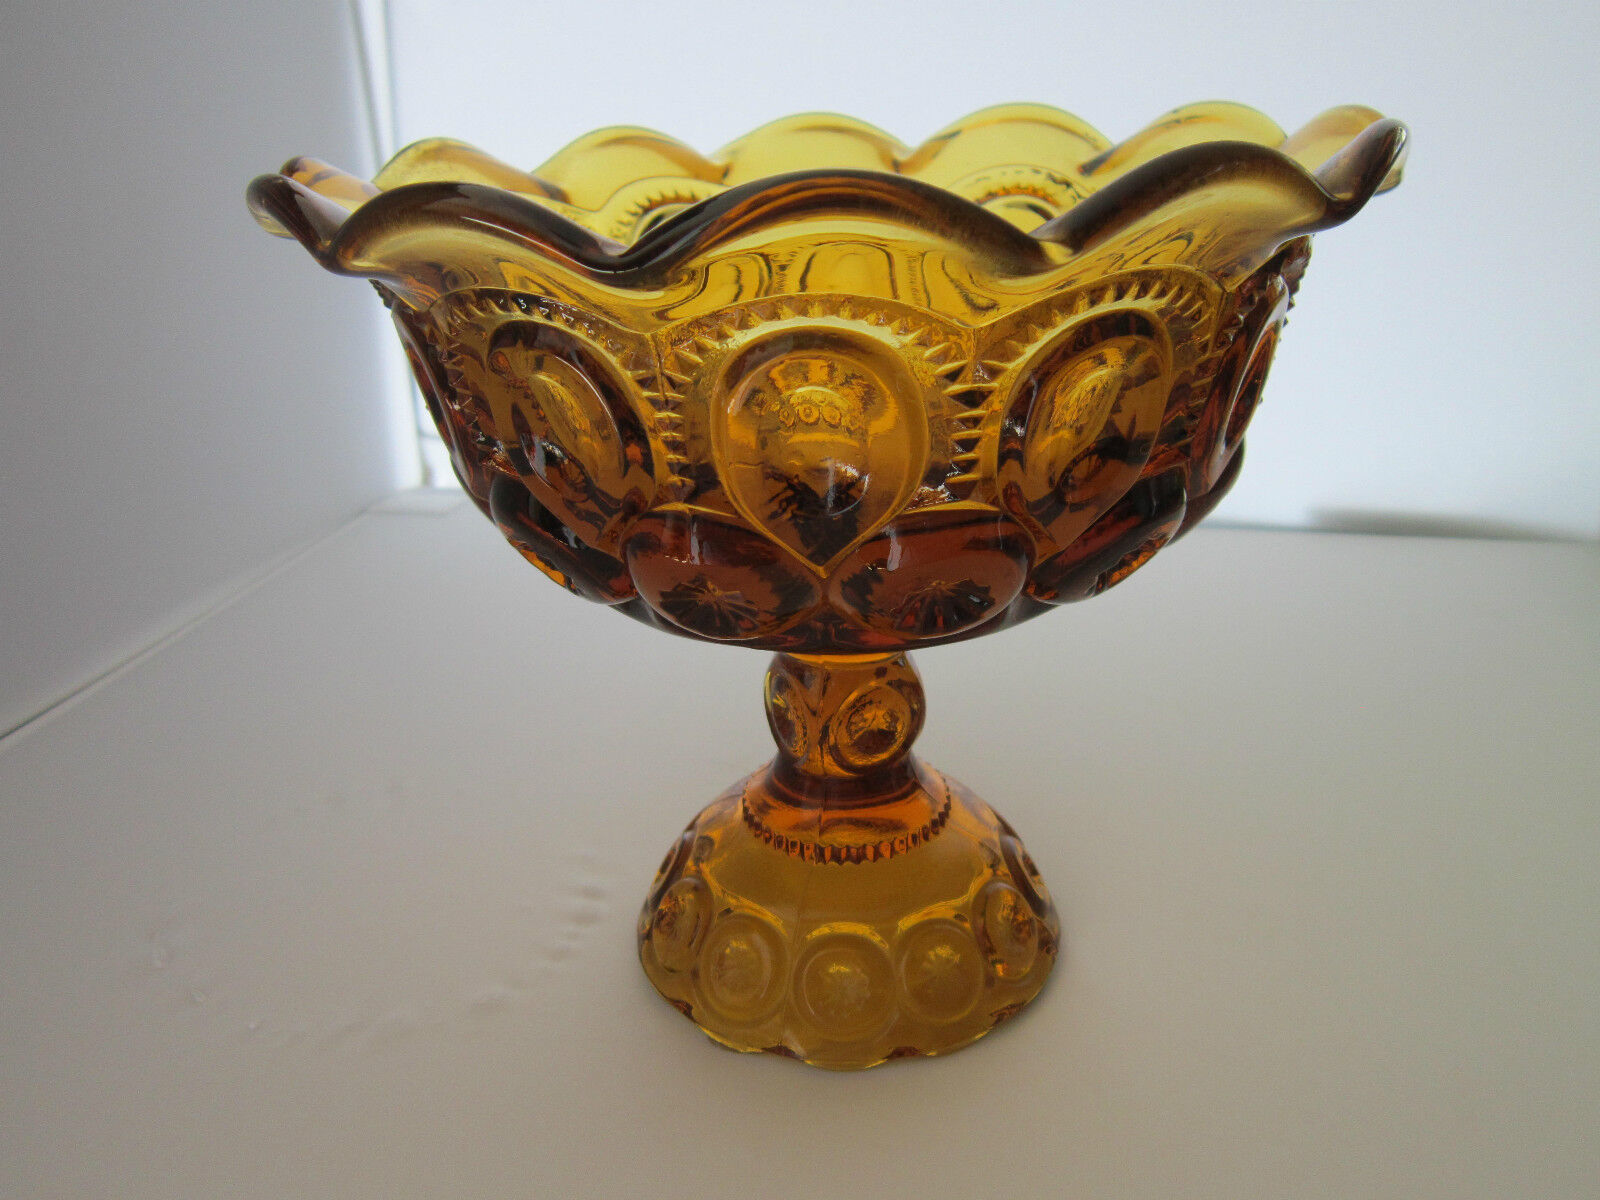 L. E. Smith, Moon & Stars, Large Footed Amber Glass Compote(s)